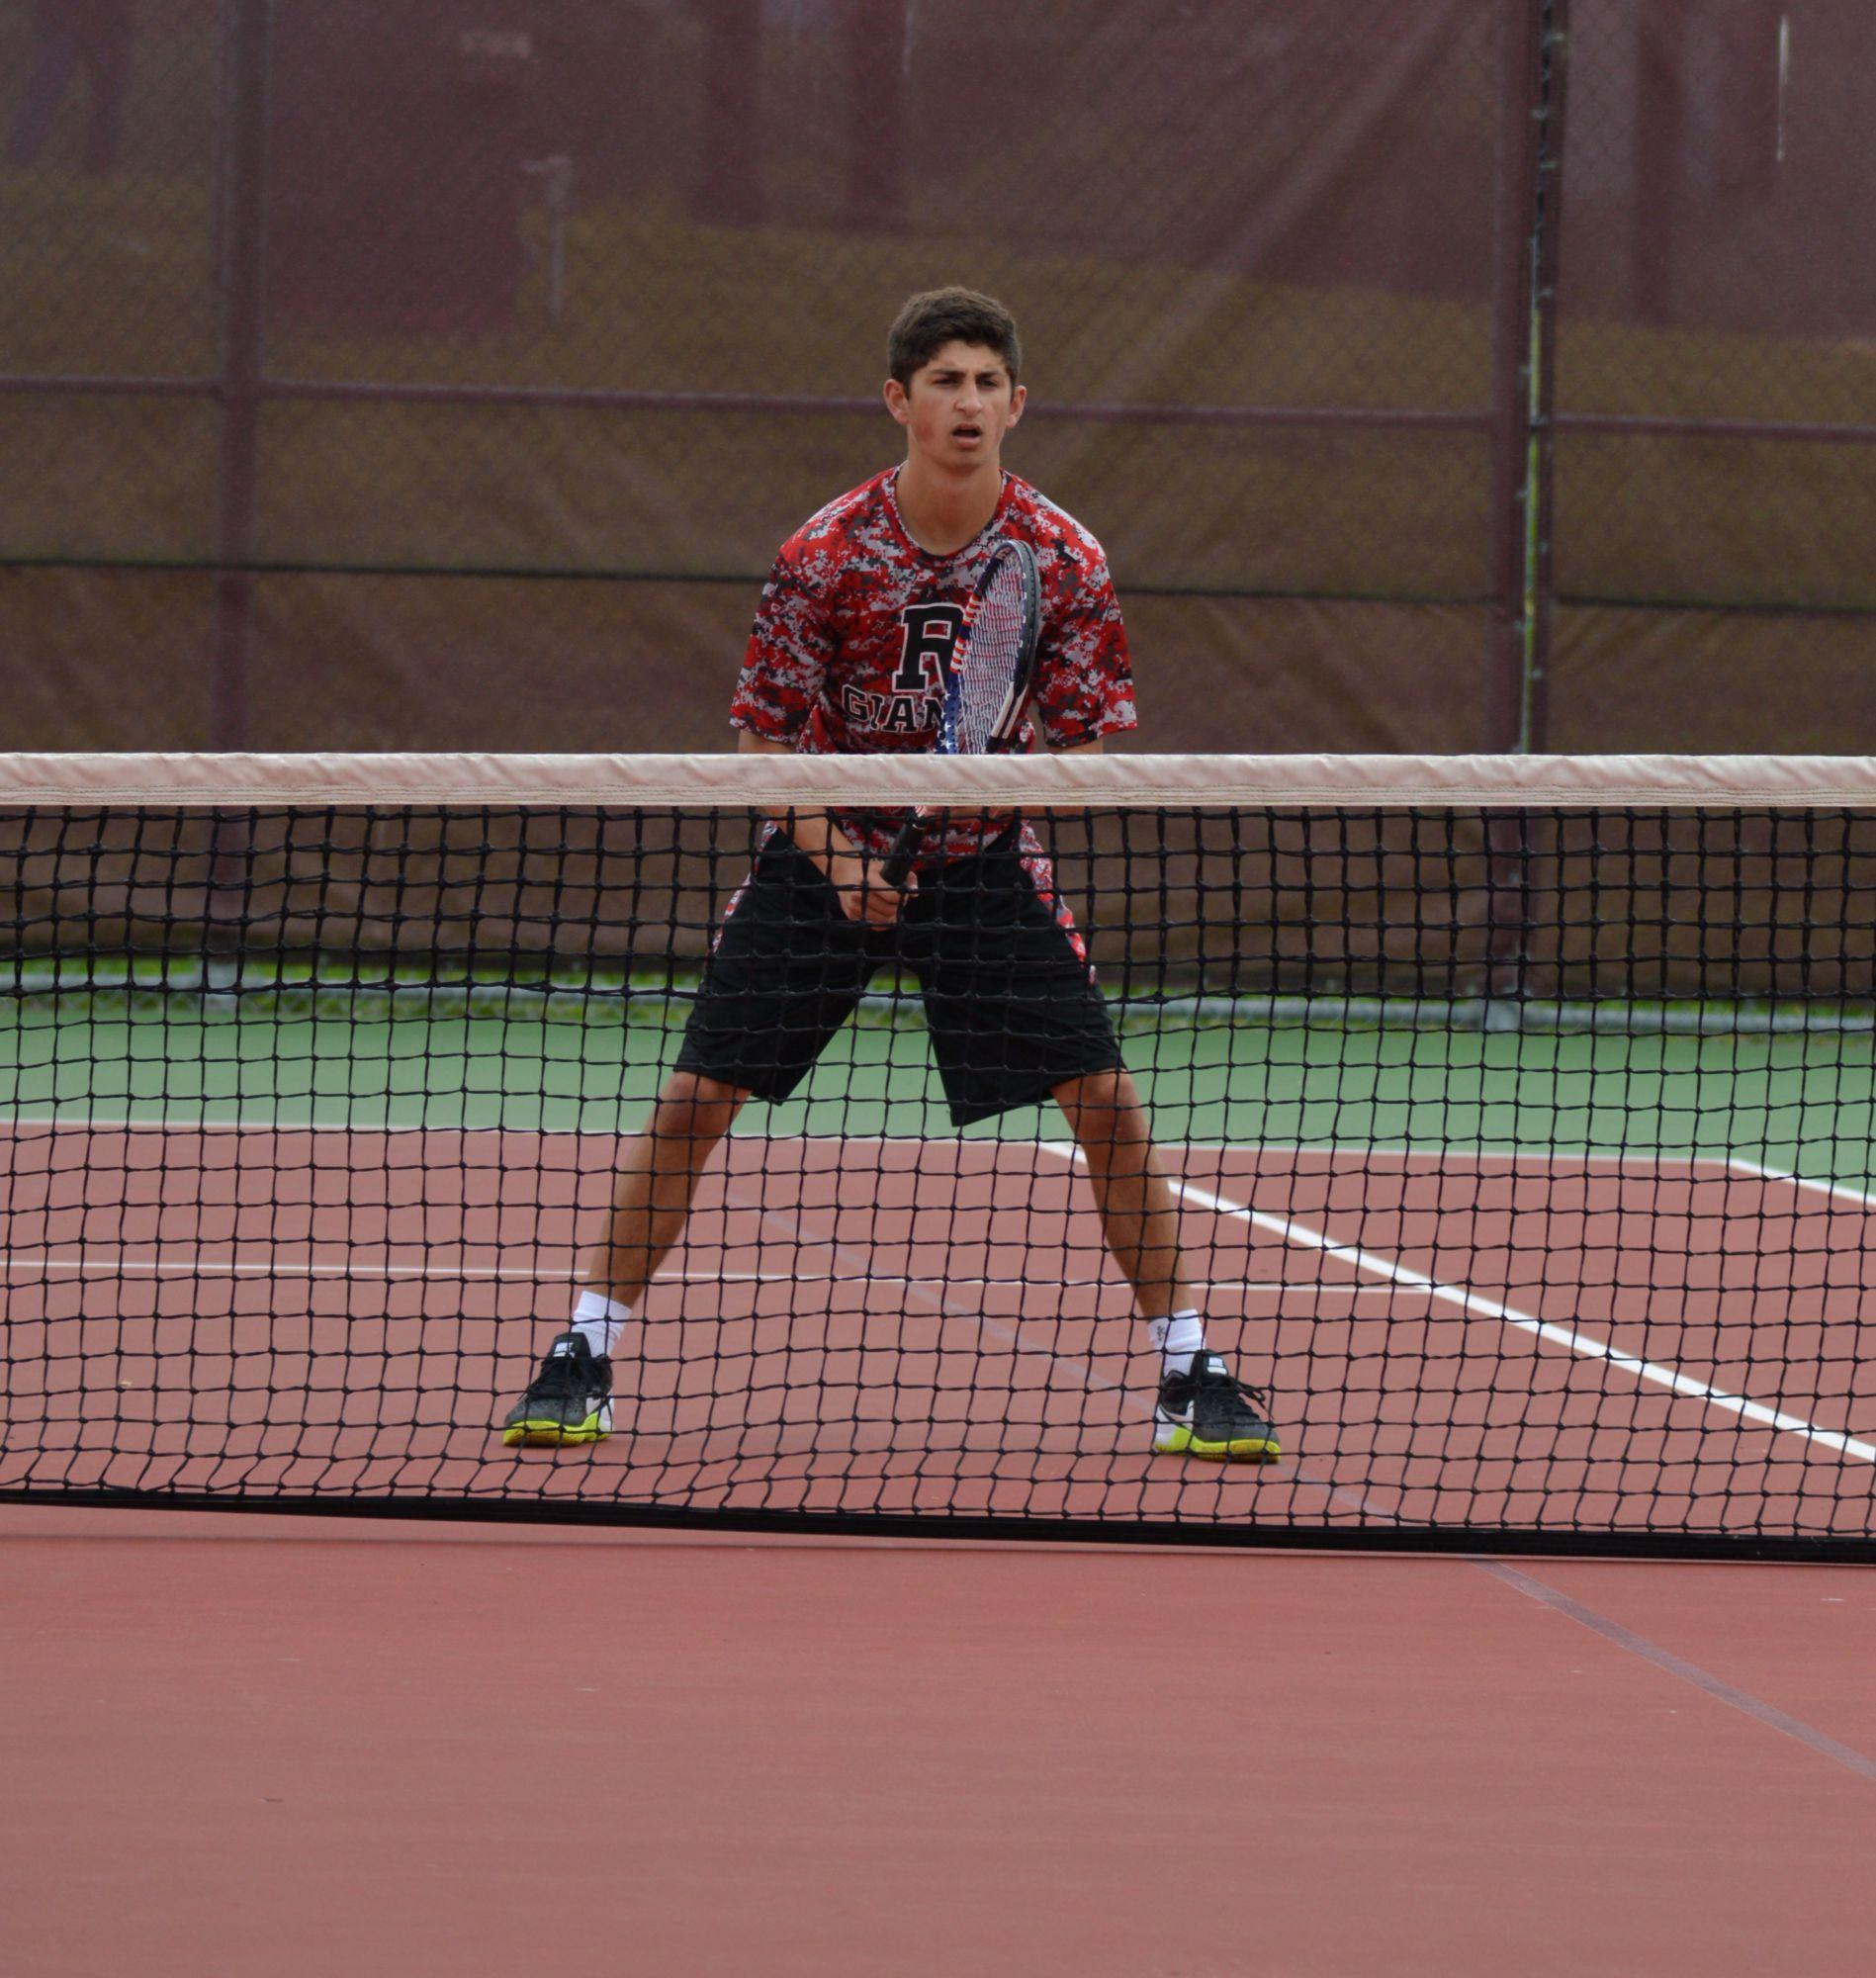 Senior Zach Babikian peers over the net during the team's playoff matchup against Branson.